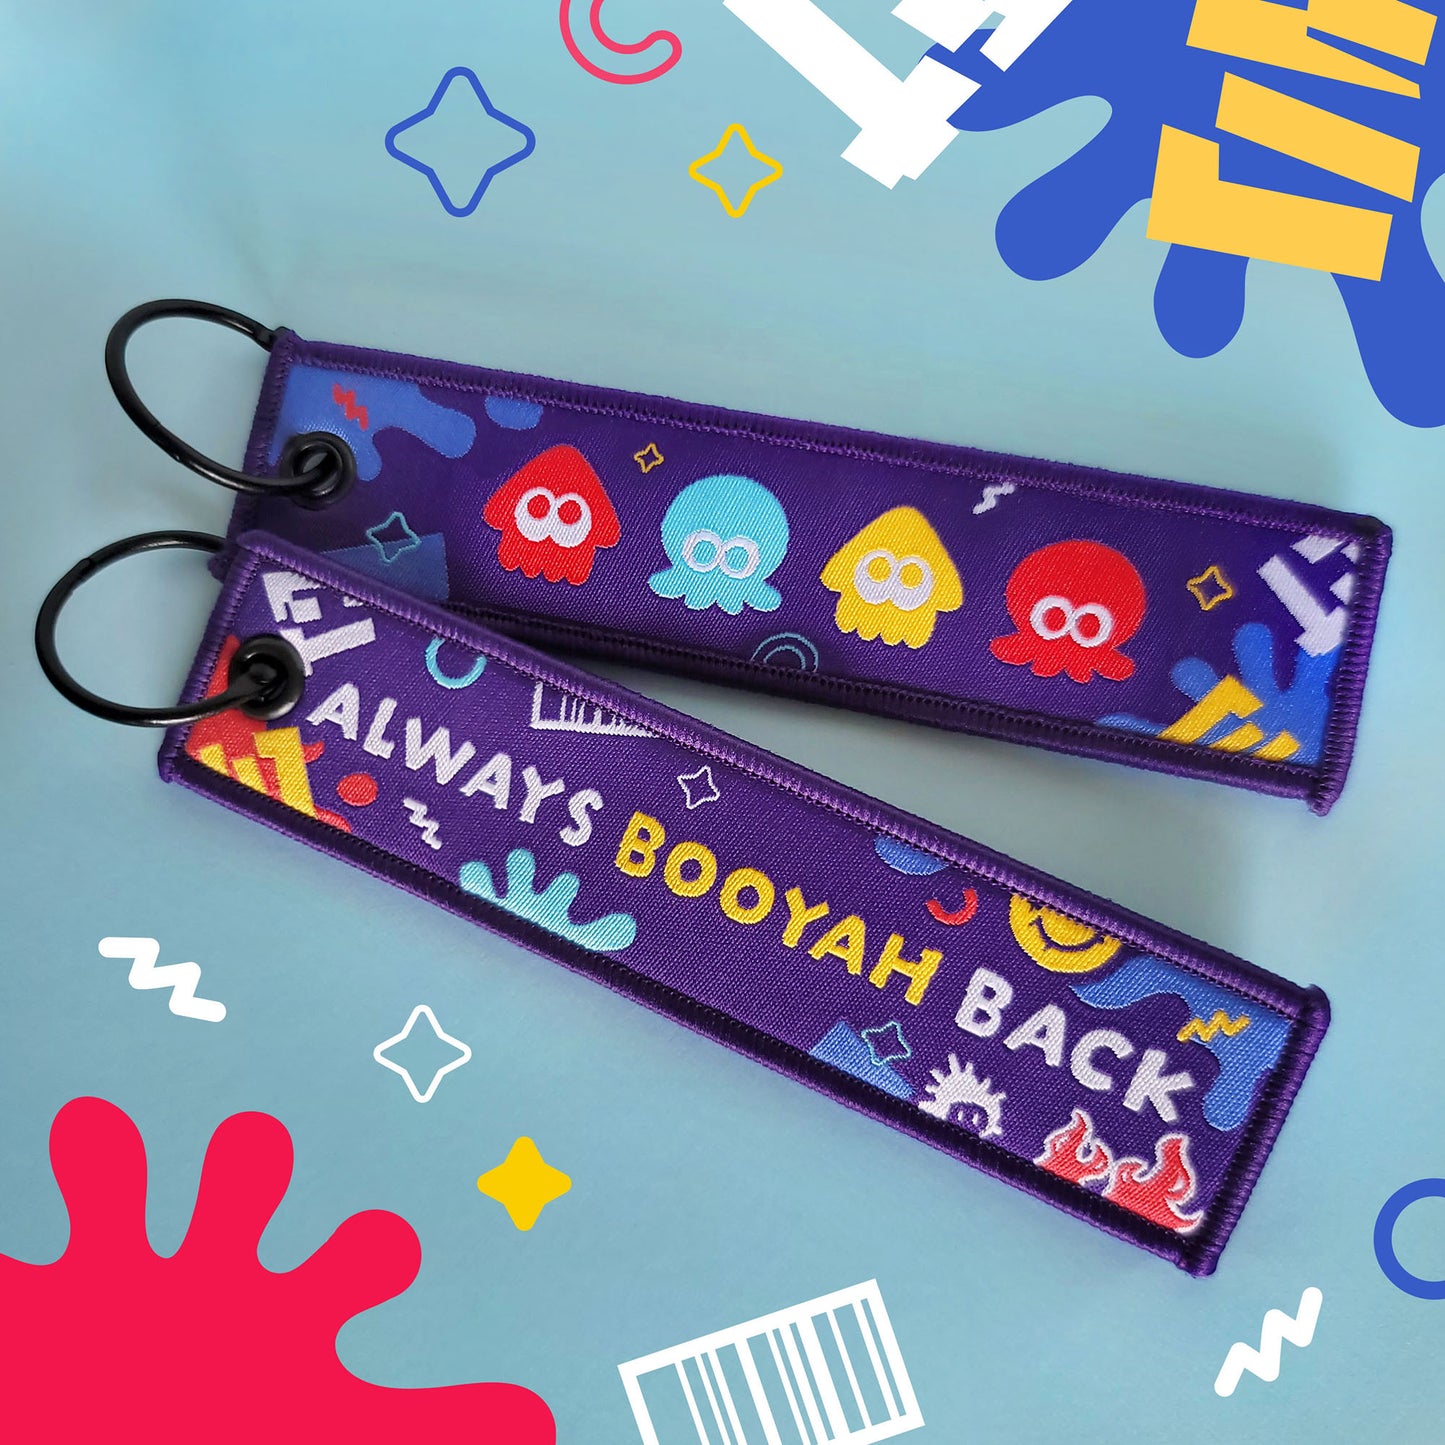 Ships from 22 June | Splatoon Always Booyah Back Embroidered Tag